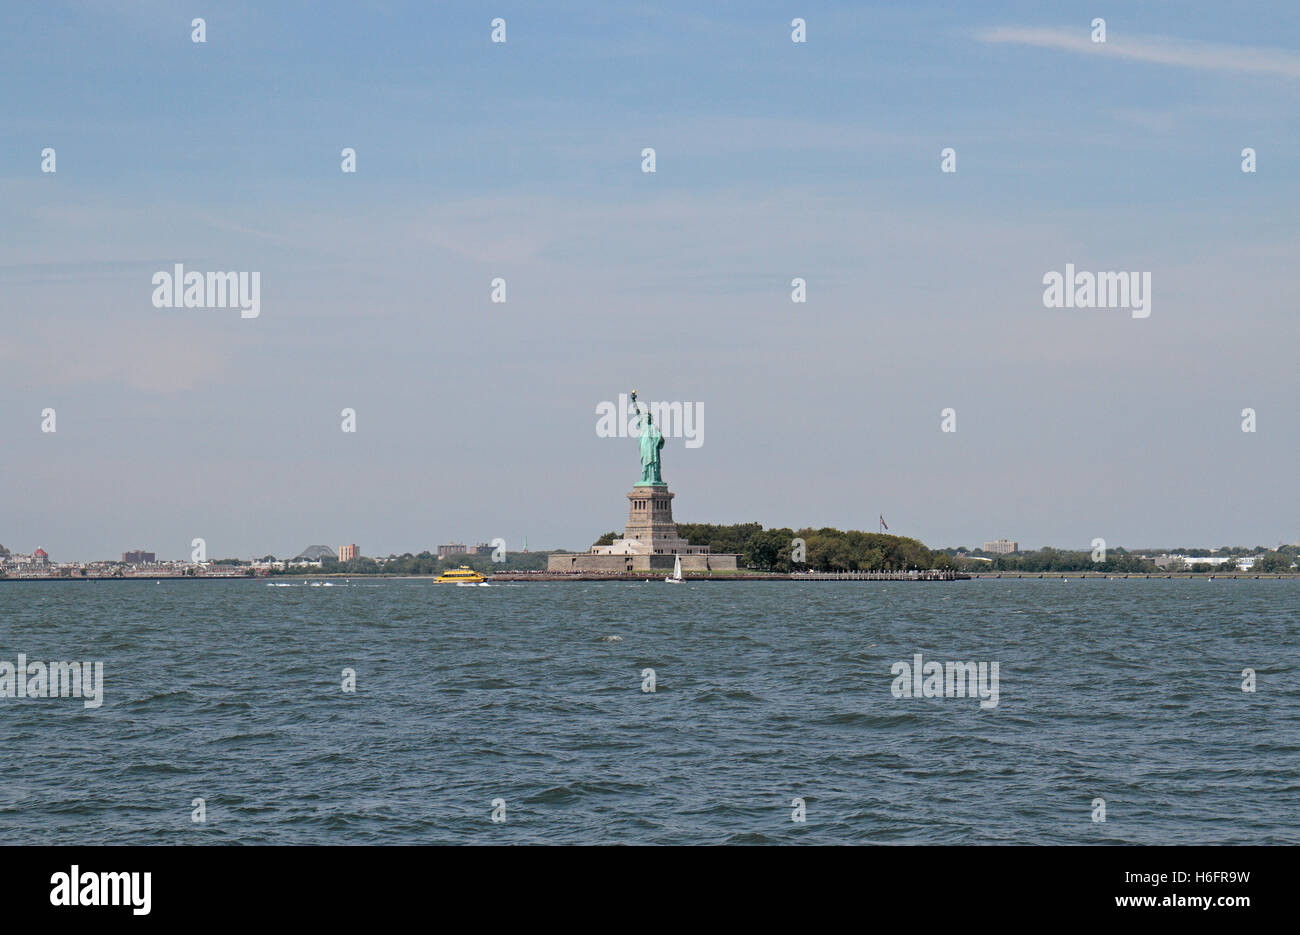 The Statue of Liberty in Upper New York Bay, New York, United States as viewed from Governors Island. Stock Photo